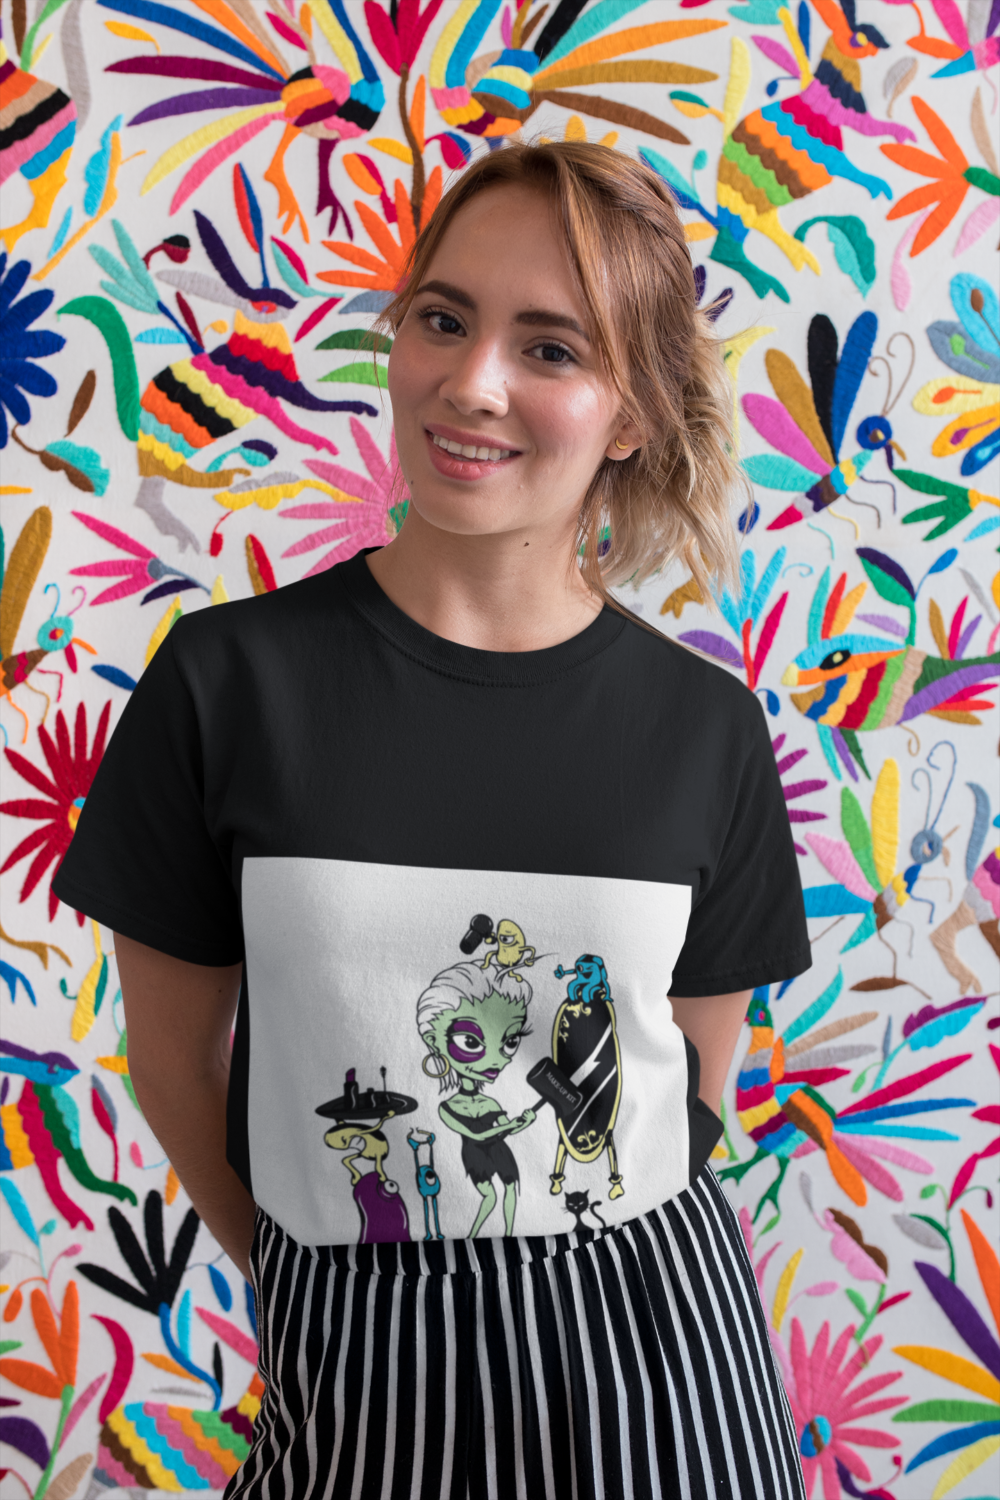 t shirt mockup of a pretty woman smiling in front of a colorful background 26643